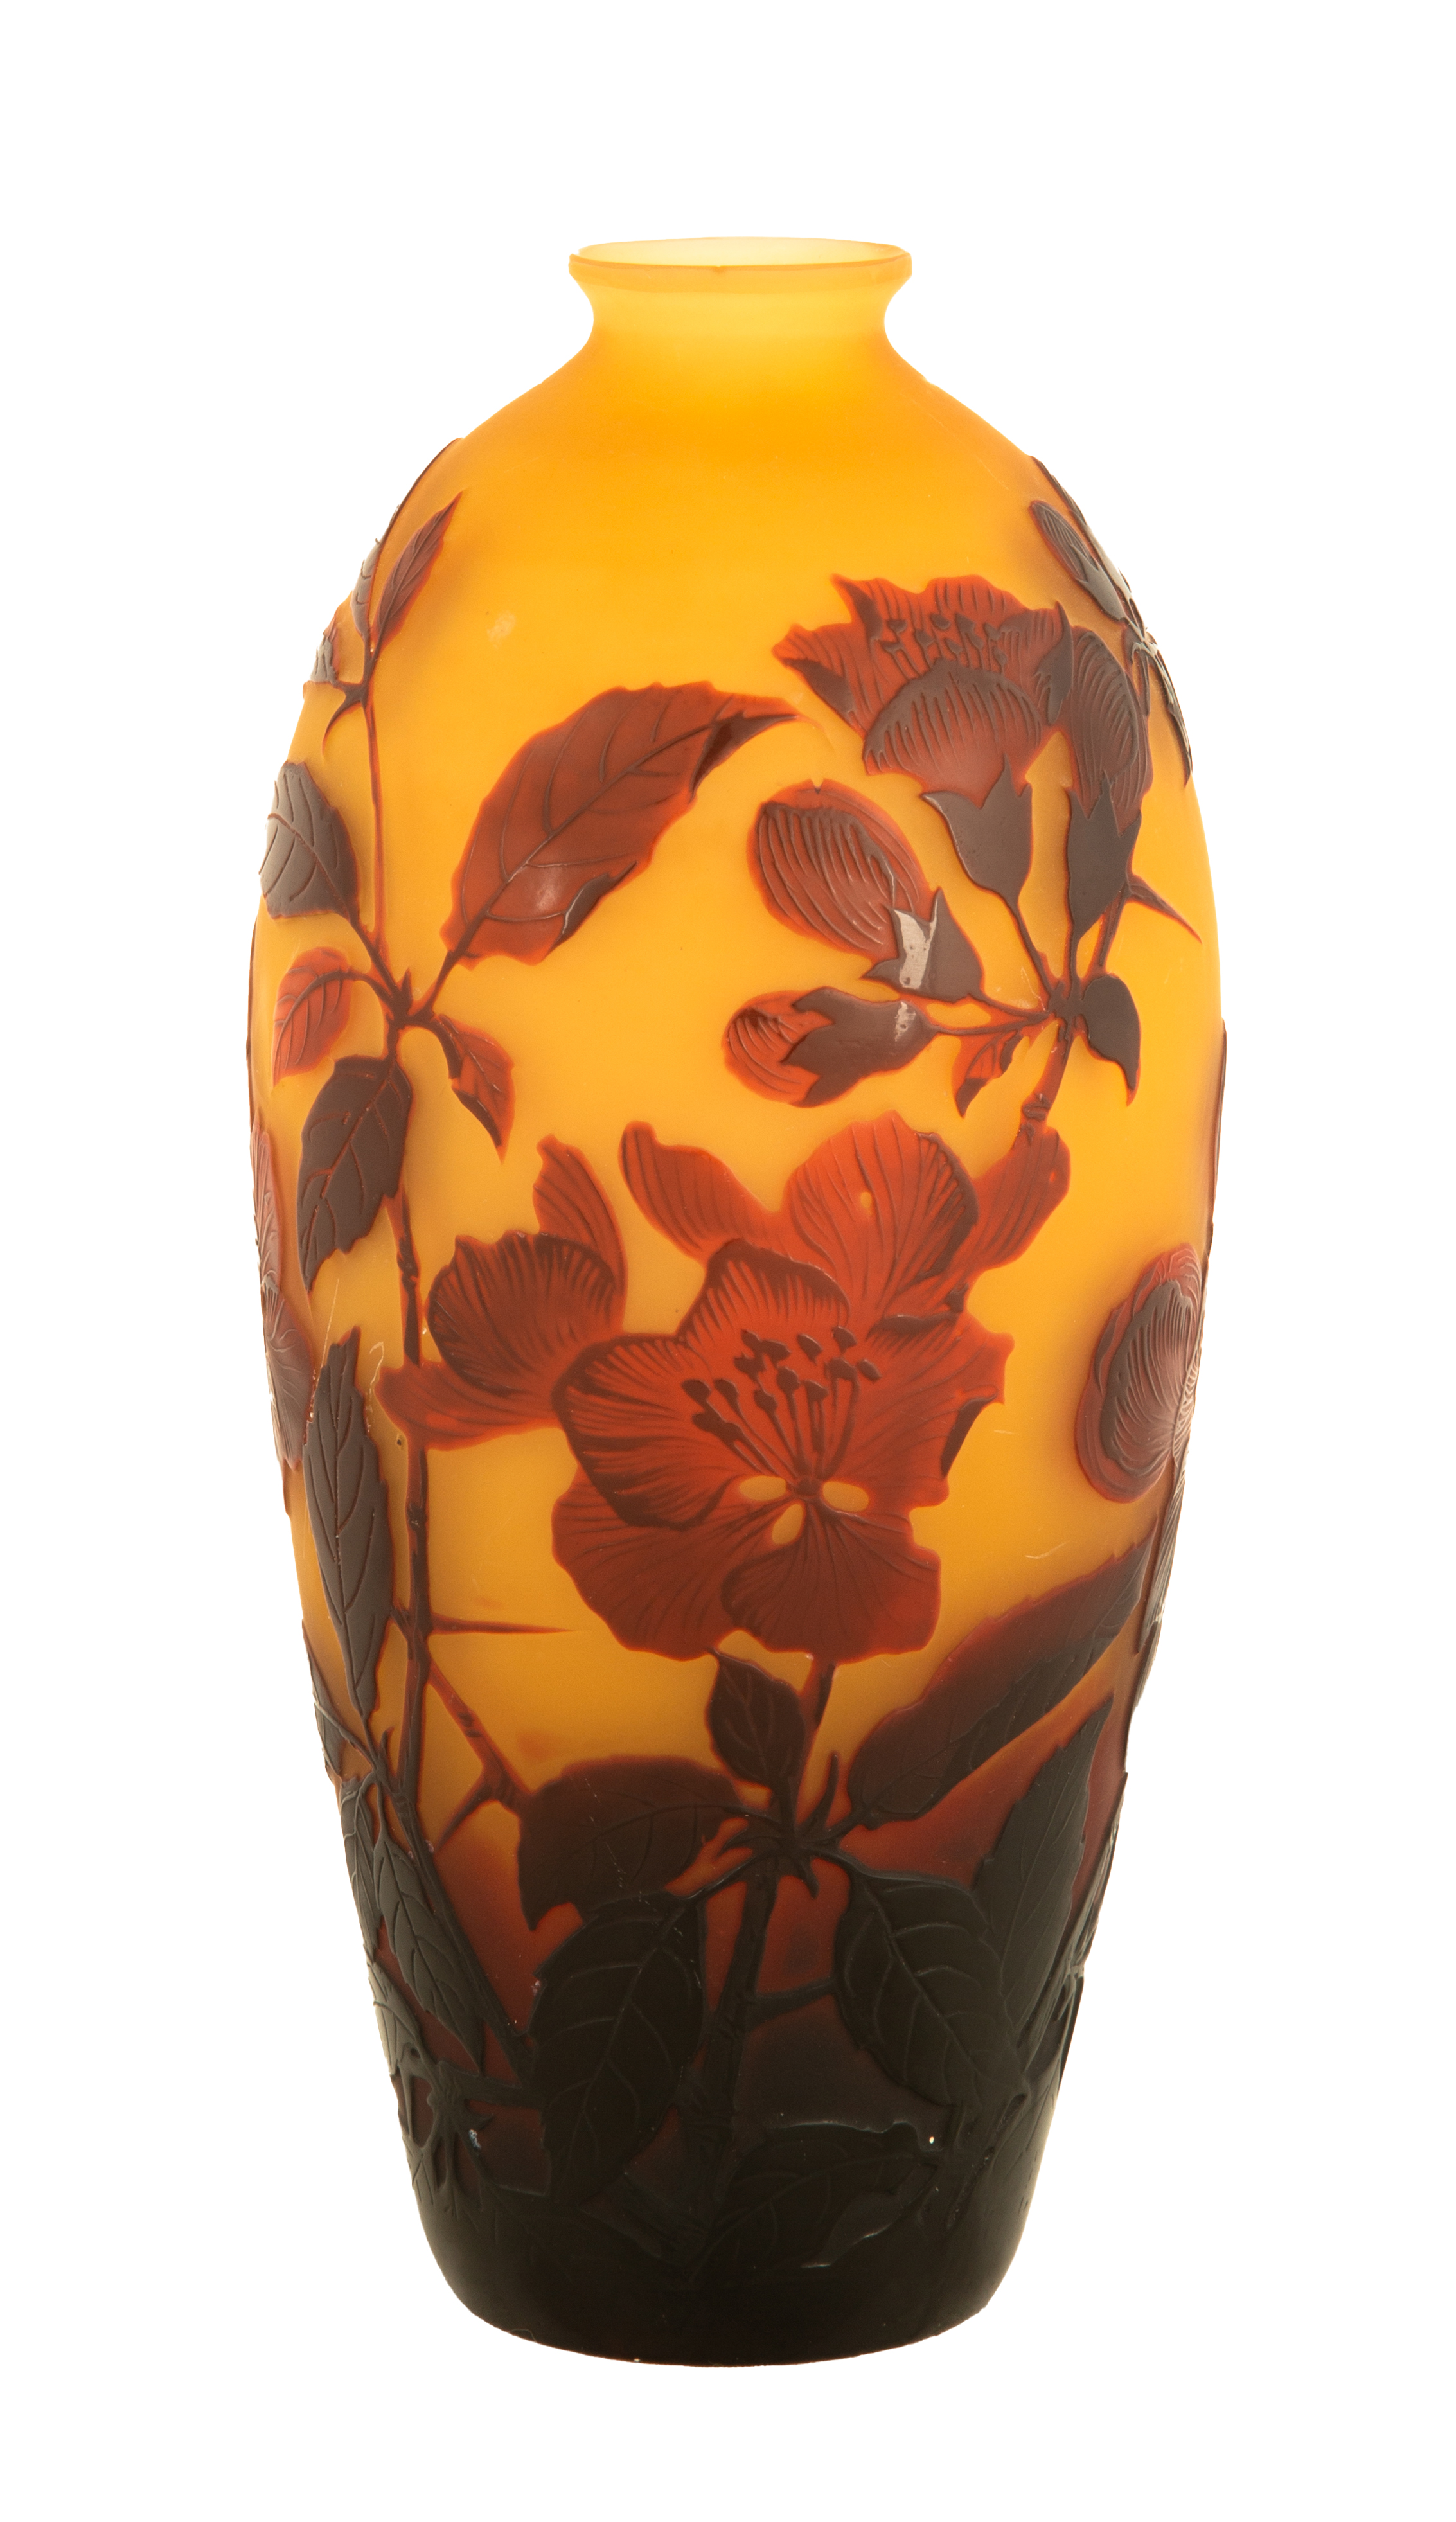 D'ARGENTAL FRENCH CAMEO VASE Early